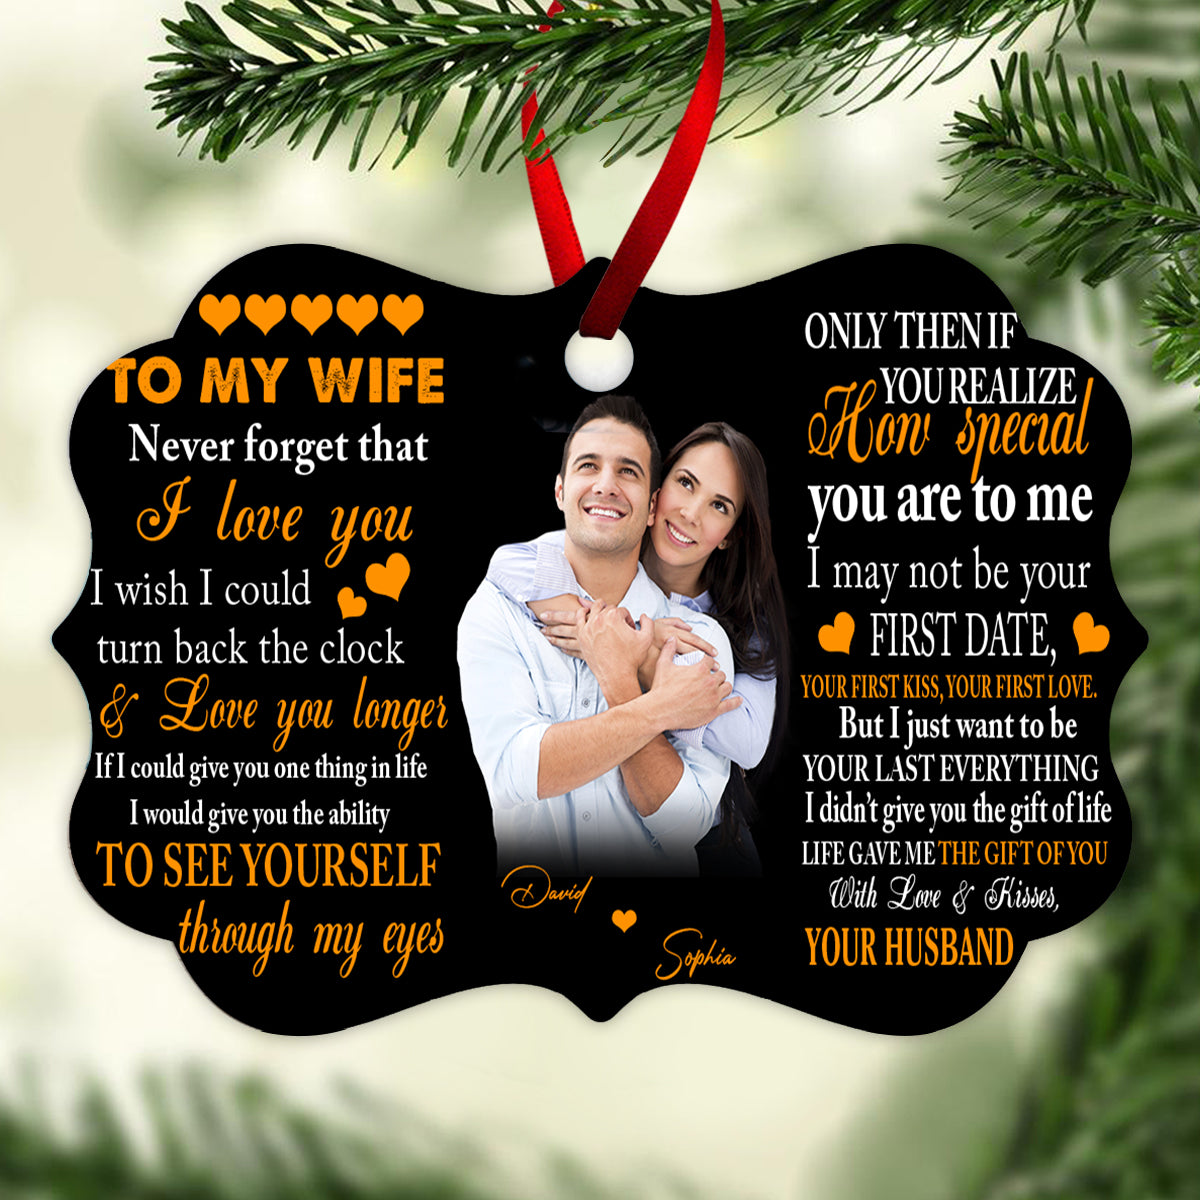 To My Wife Never Forget That I Love You - Personalized Ornament - Gift For Wife, Couple